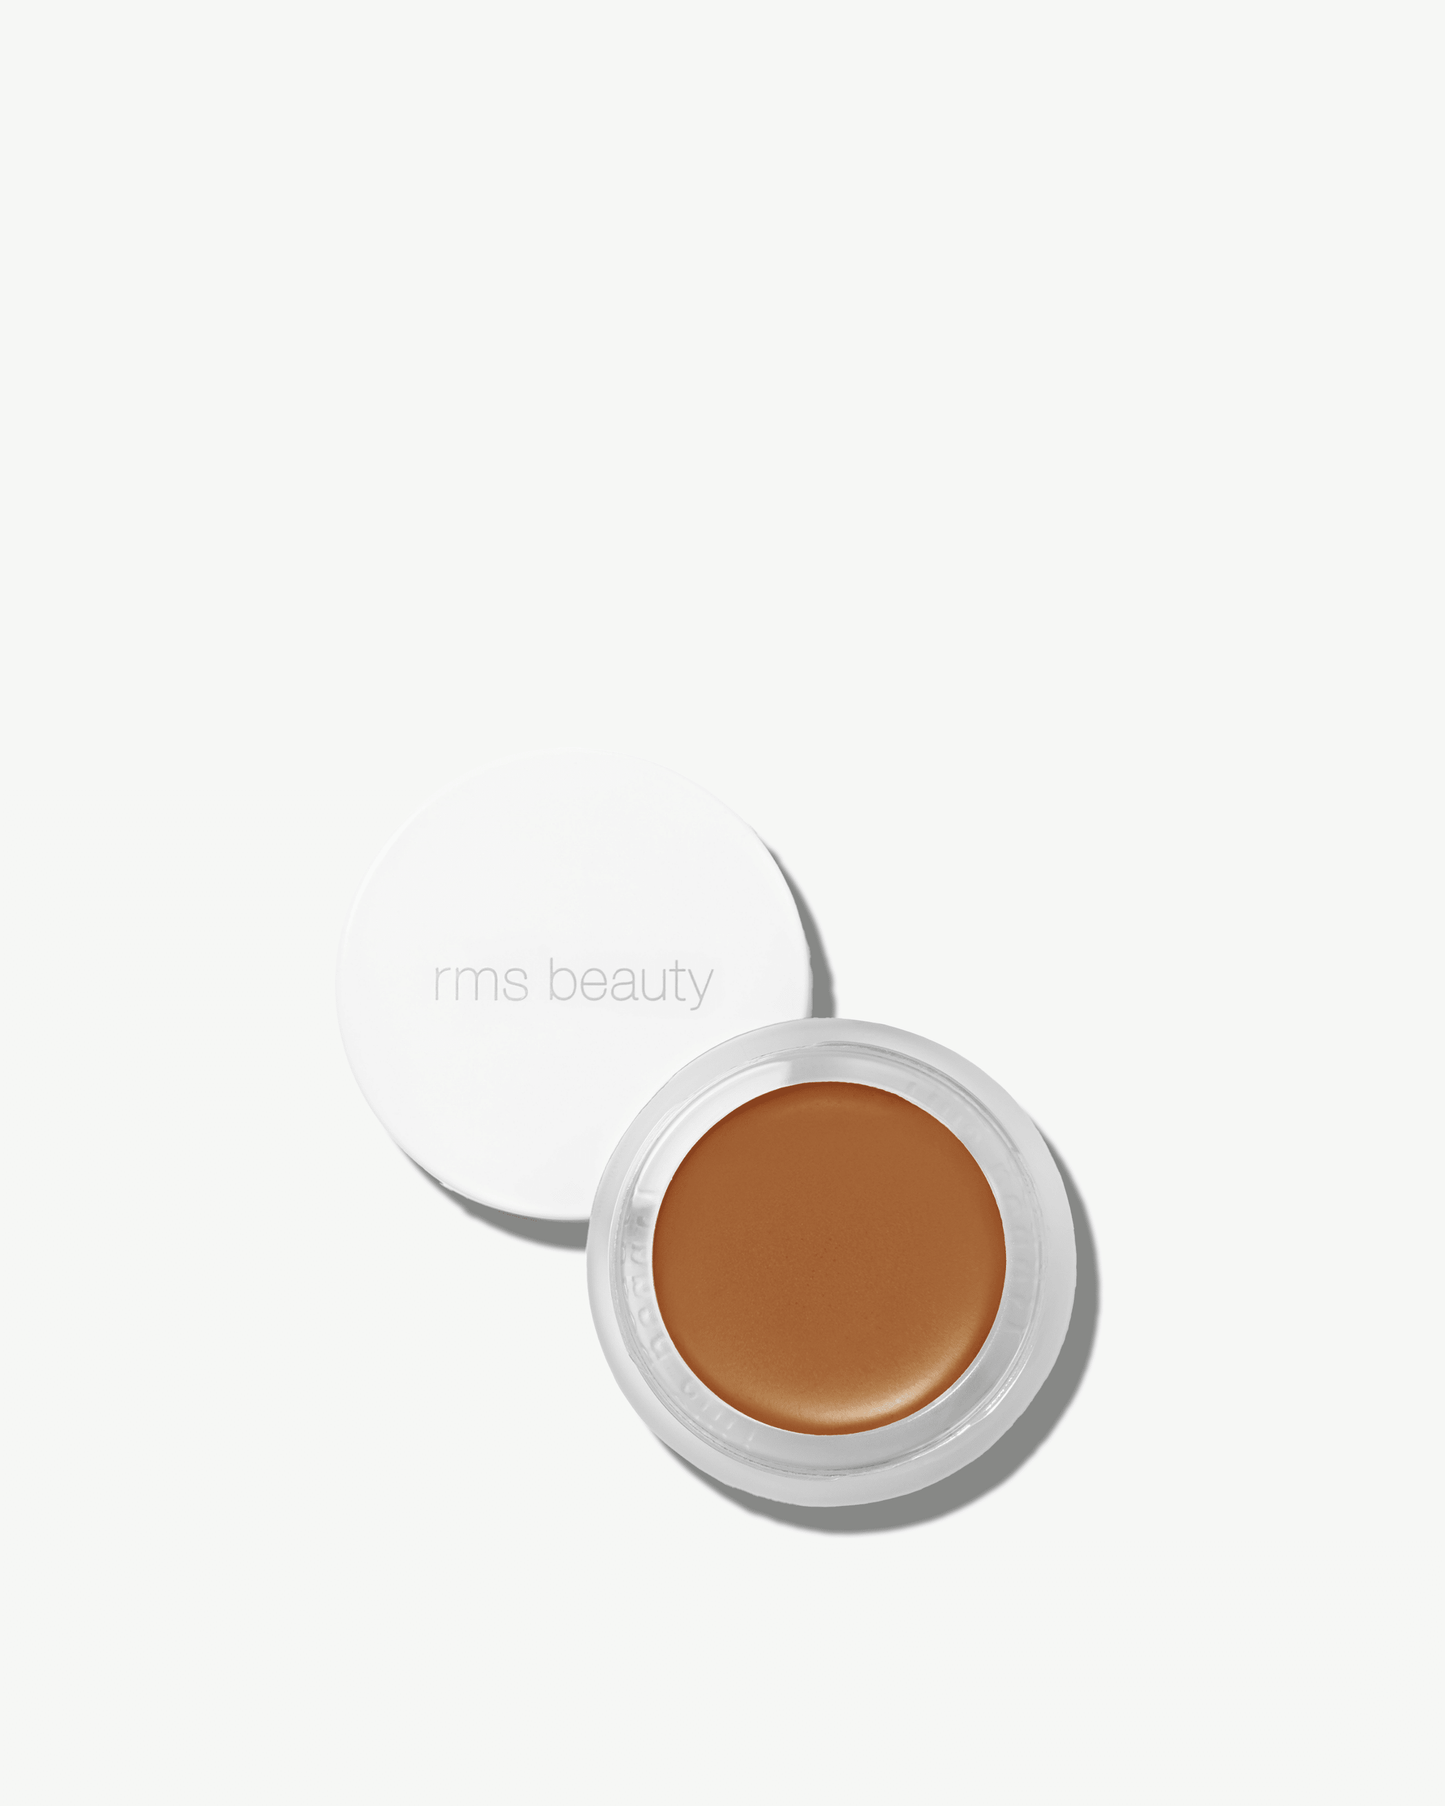 Shade 88 (for deep skin with warm undertones)